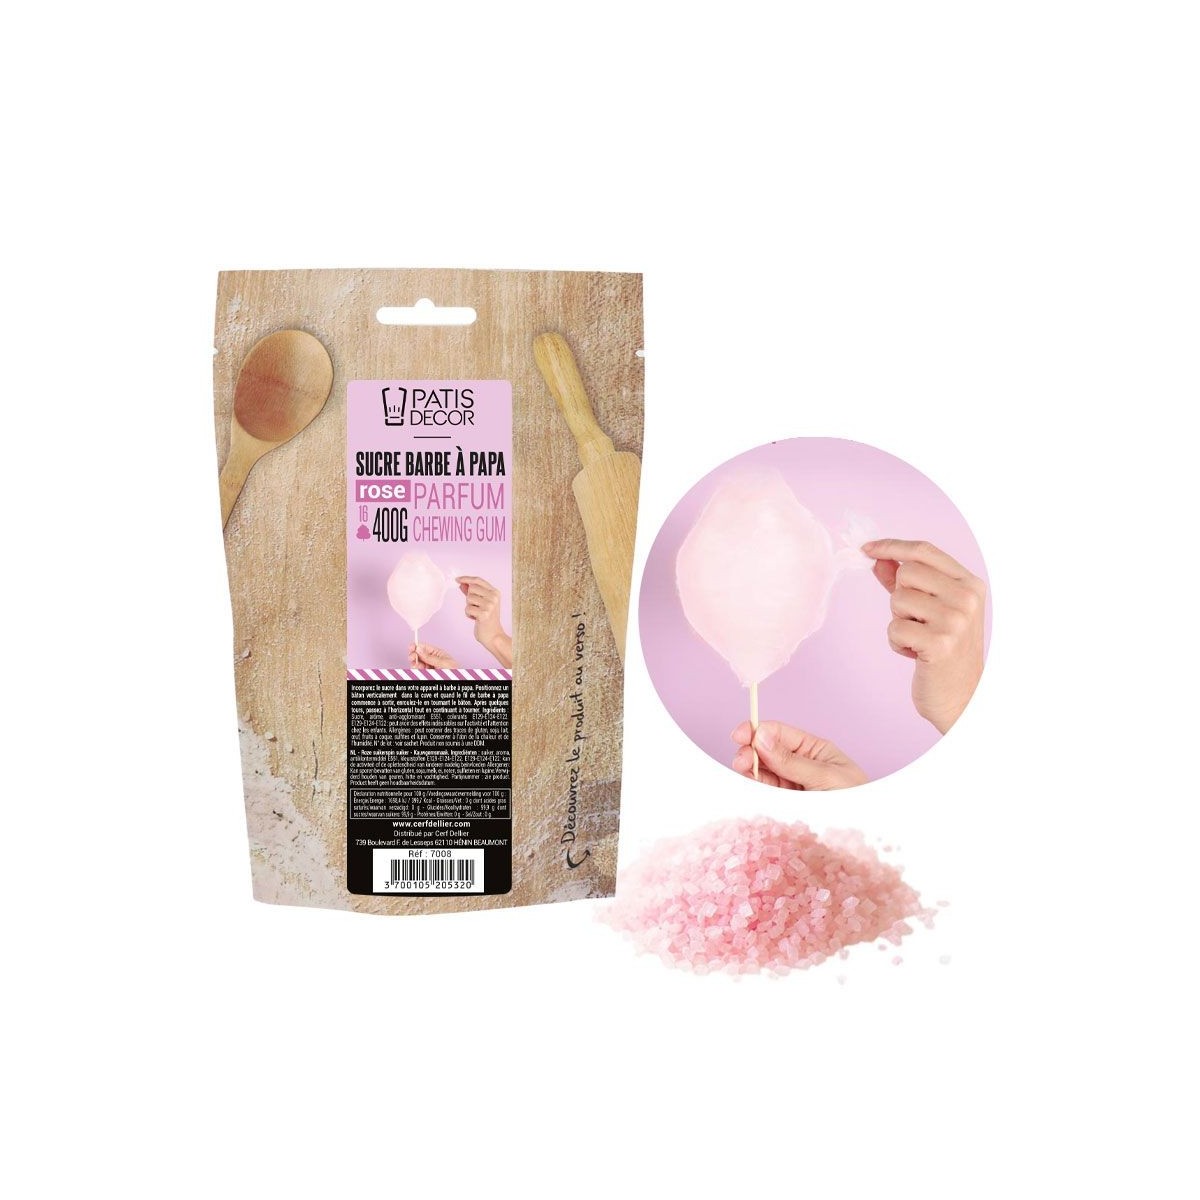 PATISDECOR SUCRE BARBE A PAPA AROMATISE CHEWING GUM 400GR